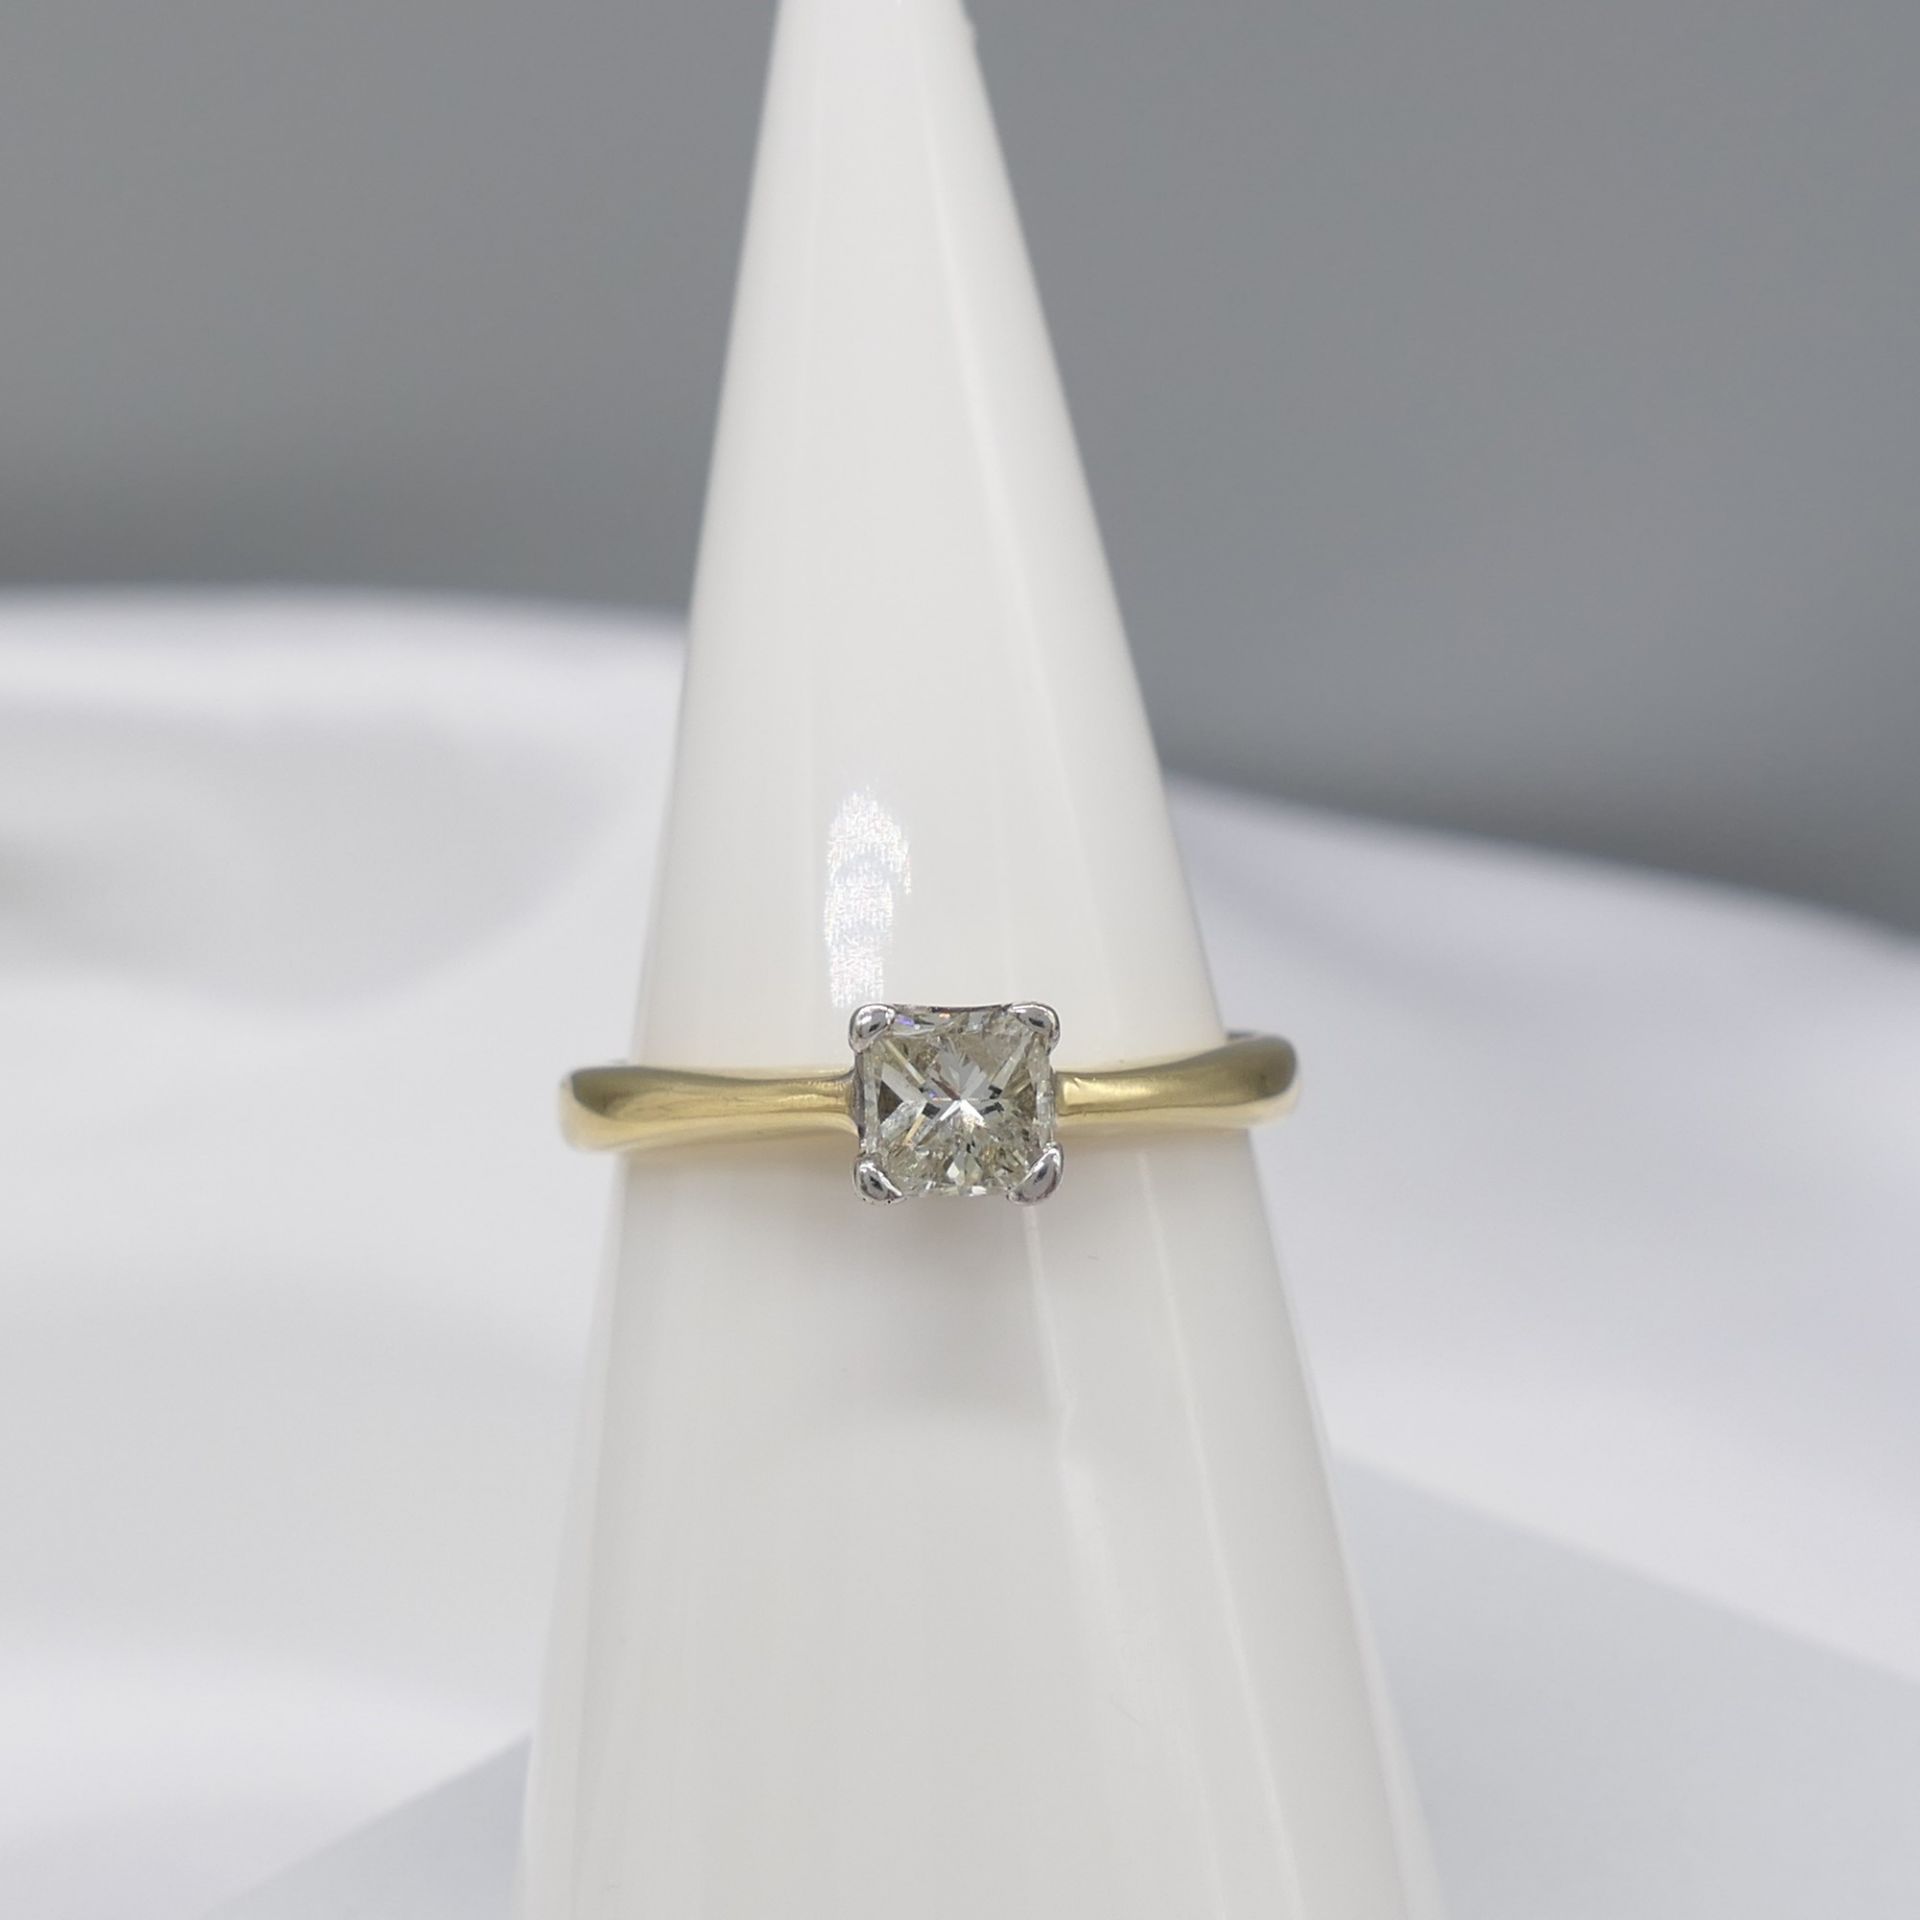 Square princess-cut 0.52 carat diamond solitaire ring in 18ct gold, with report - Image 2 of 7